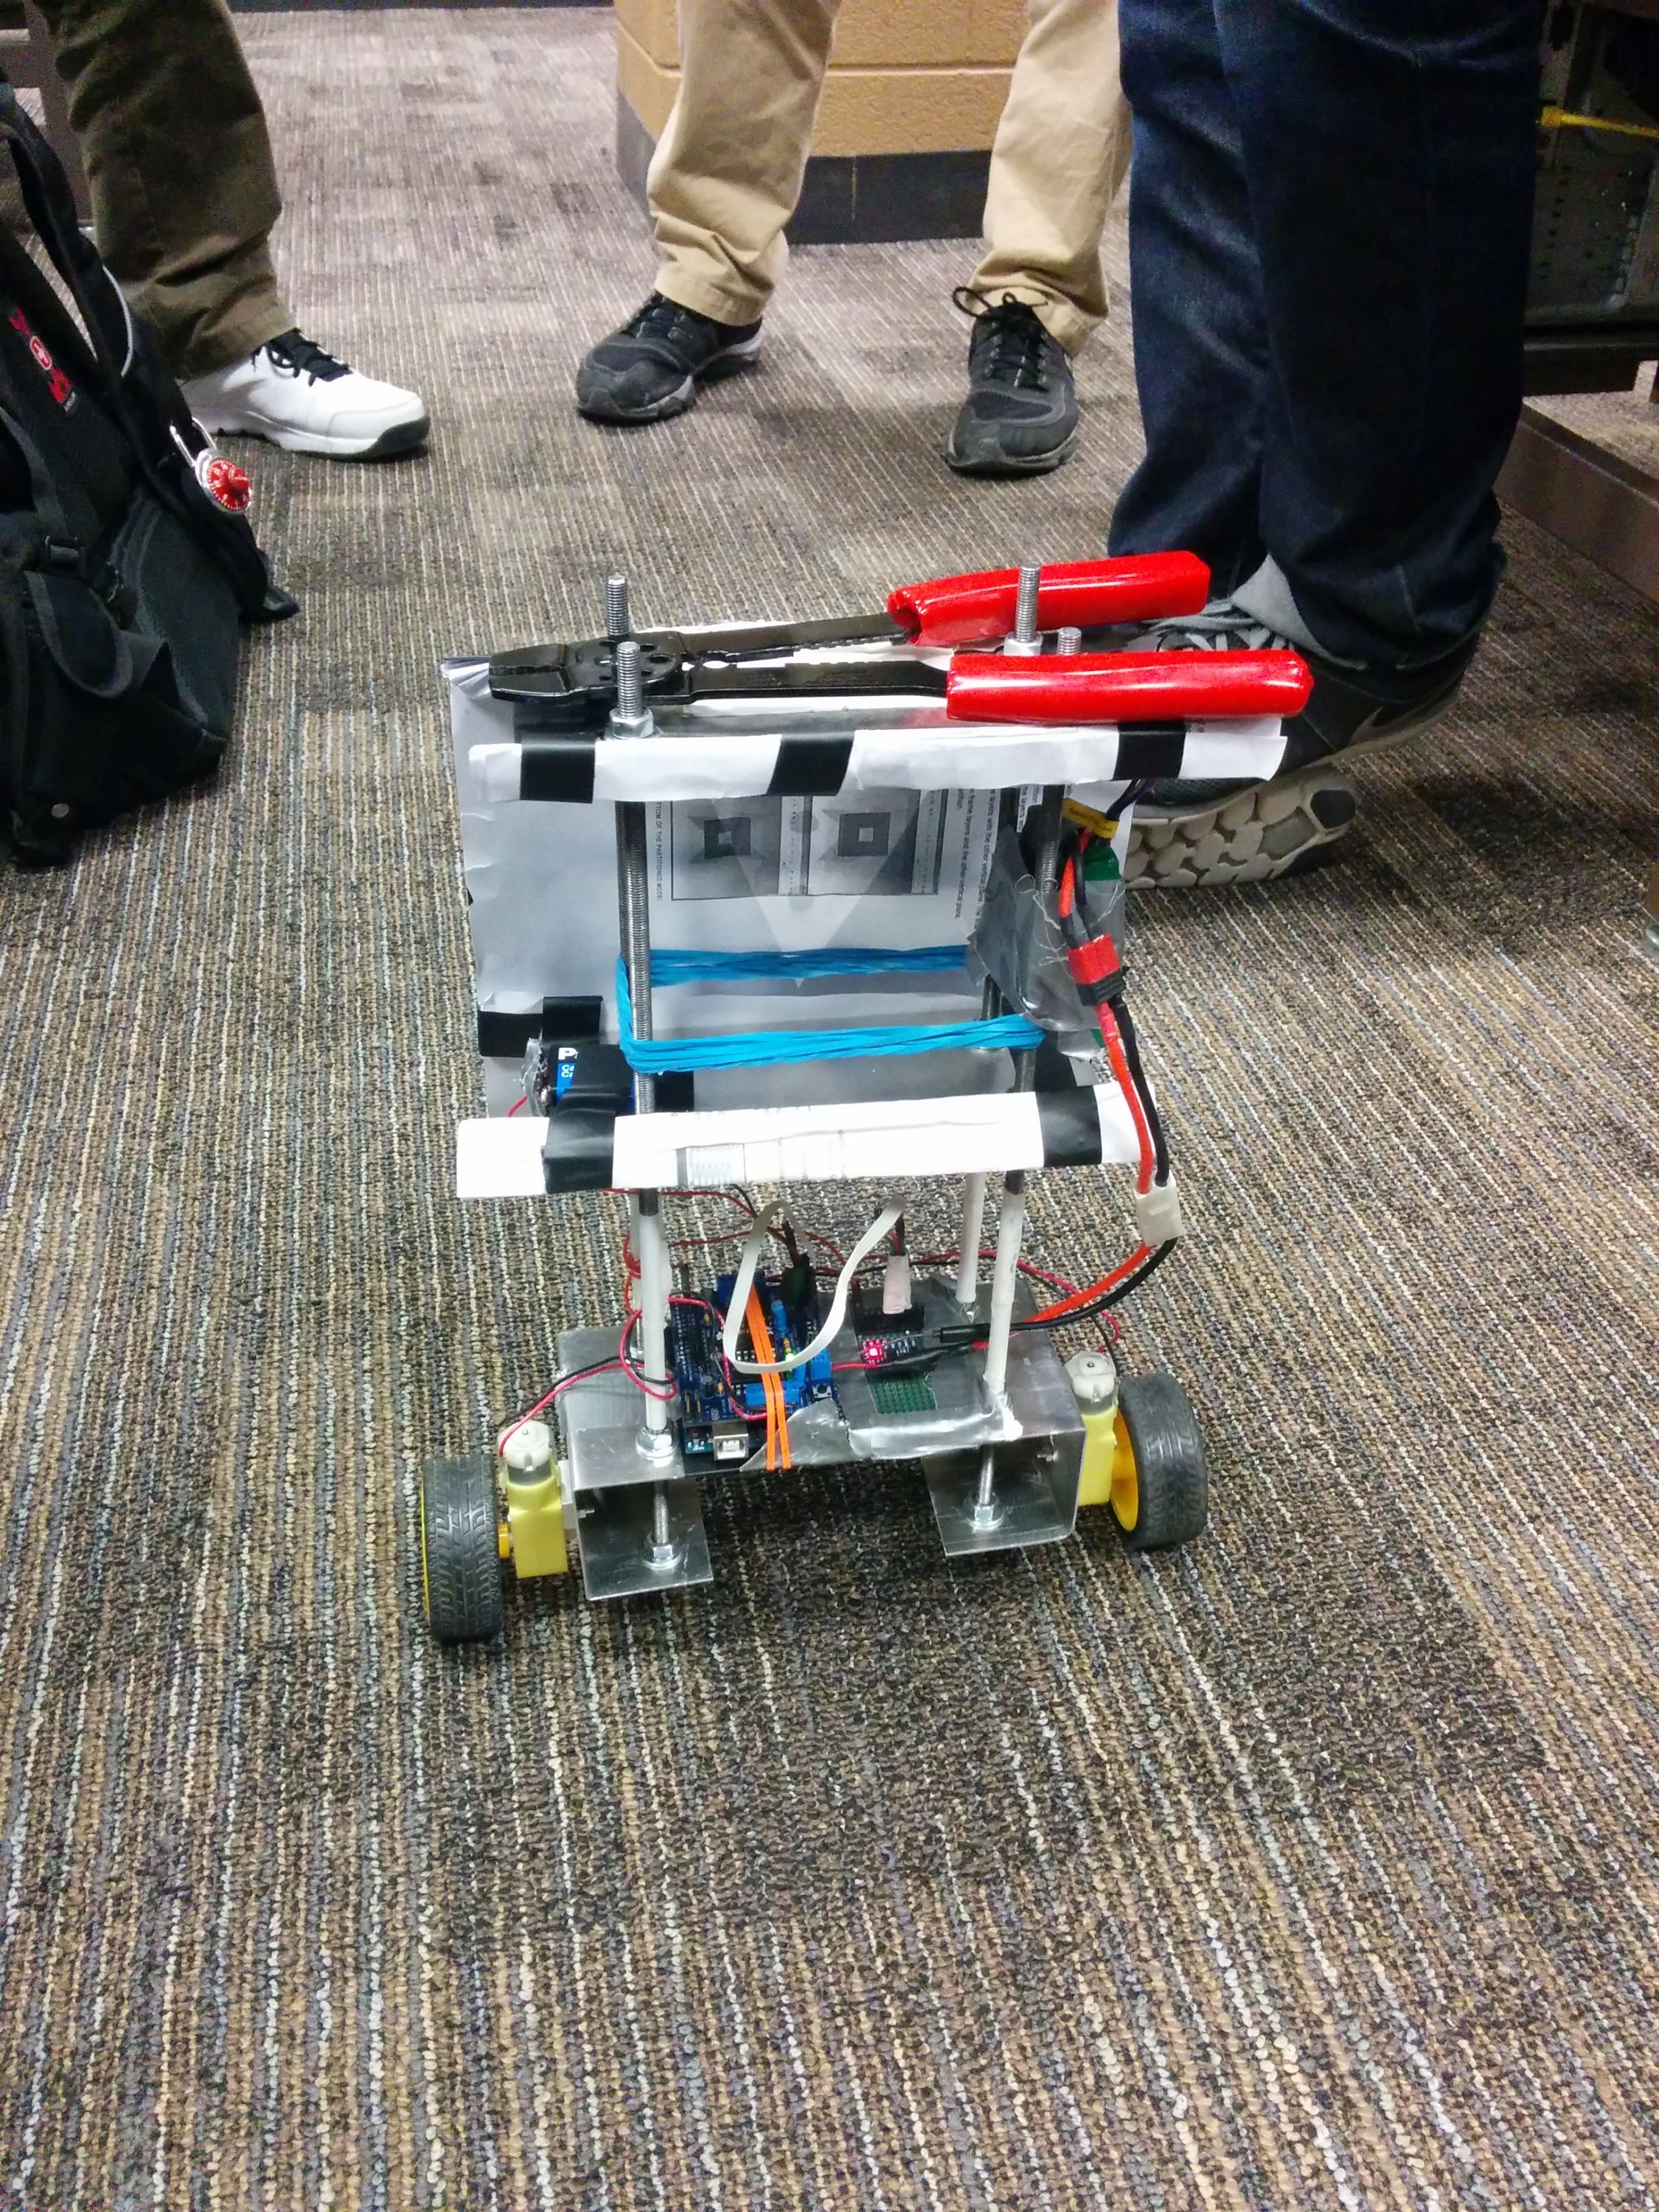 Self-balancing robot run by Arduino holding wire crimpers.